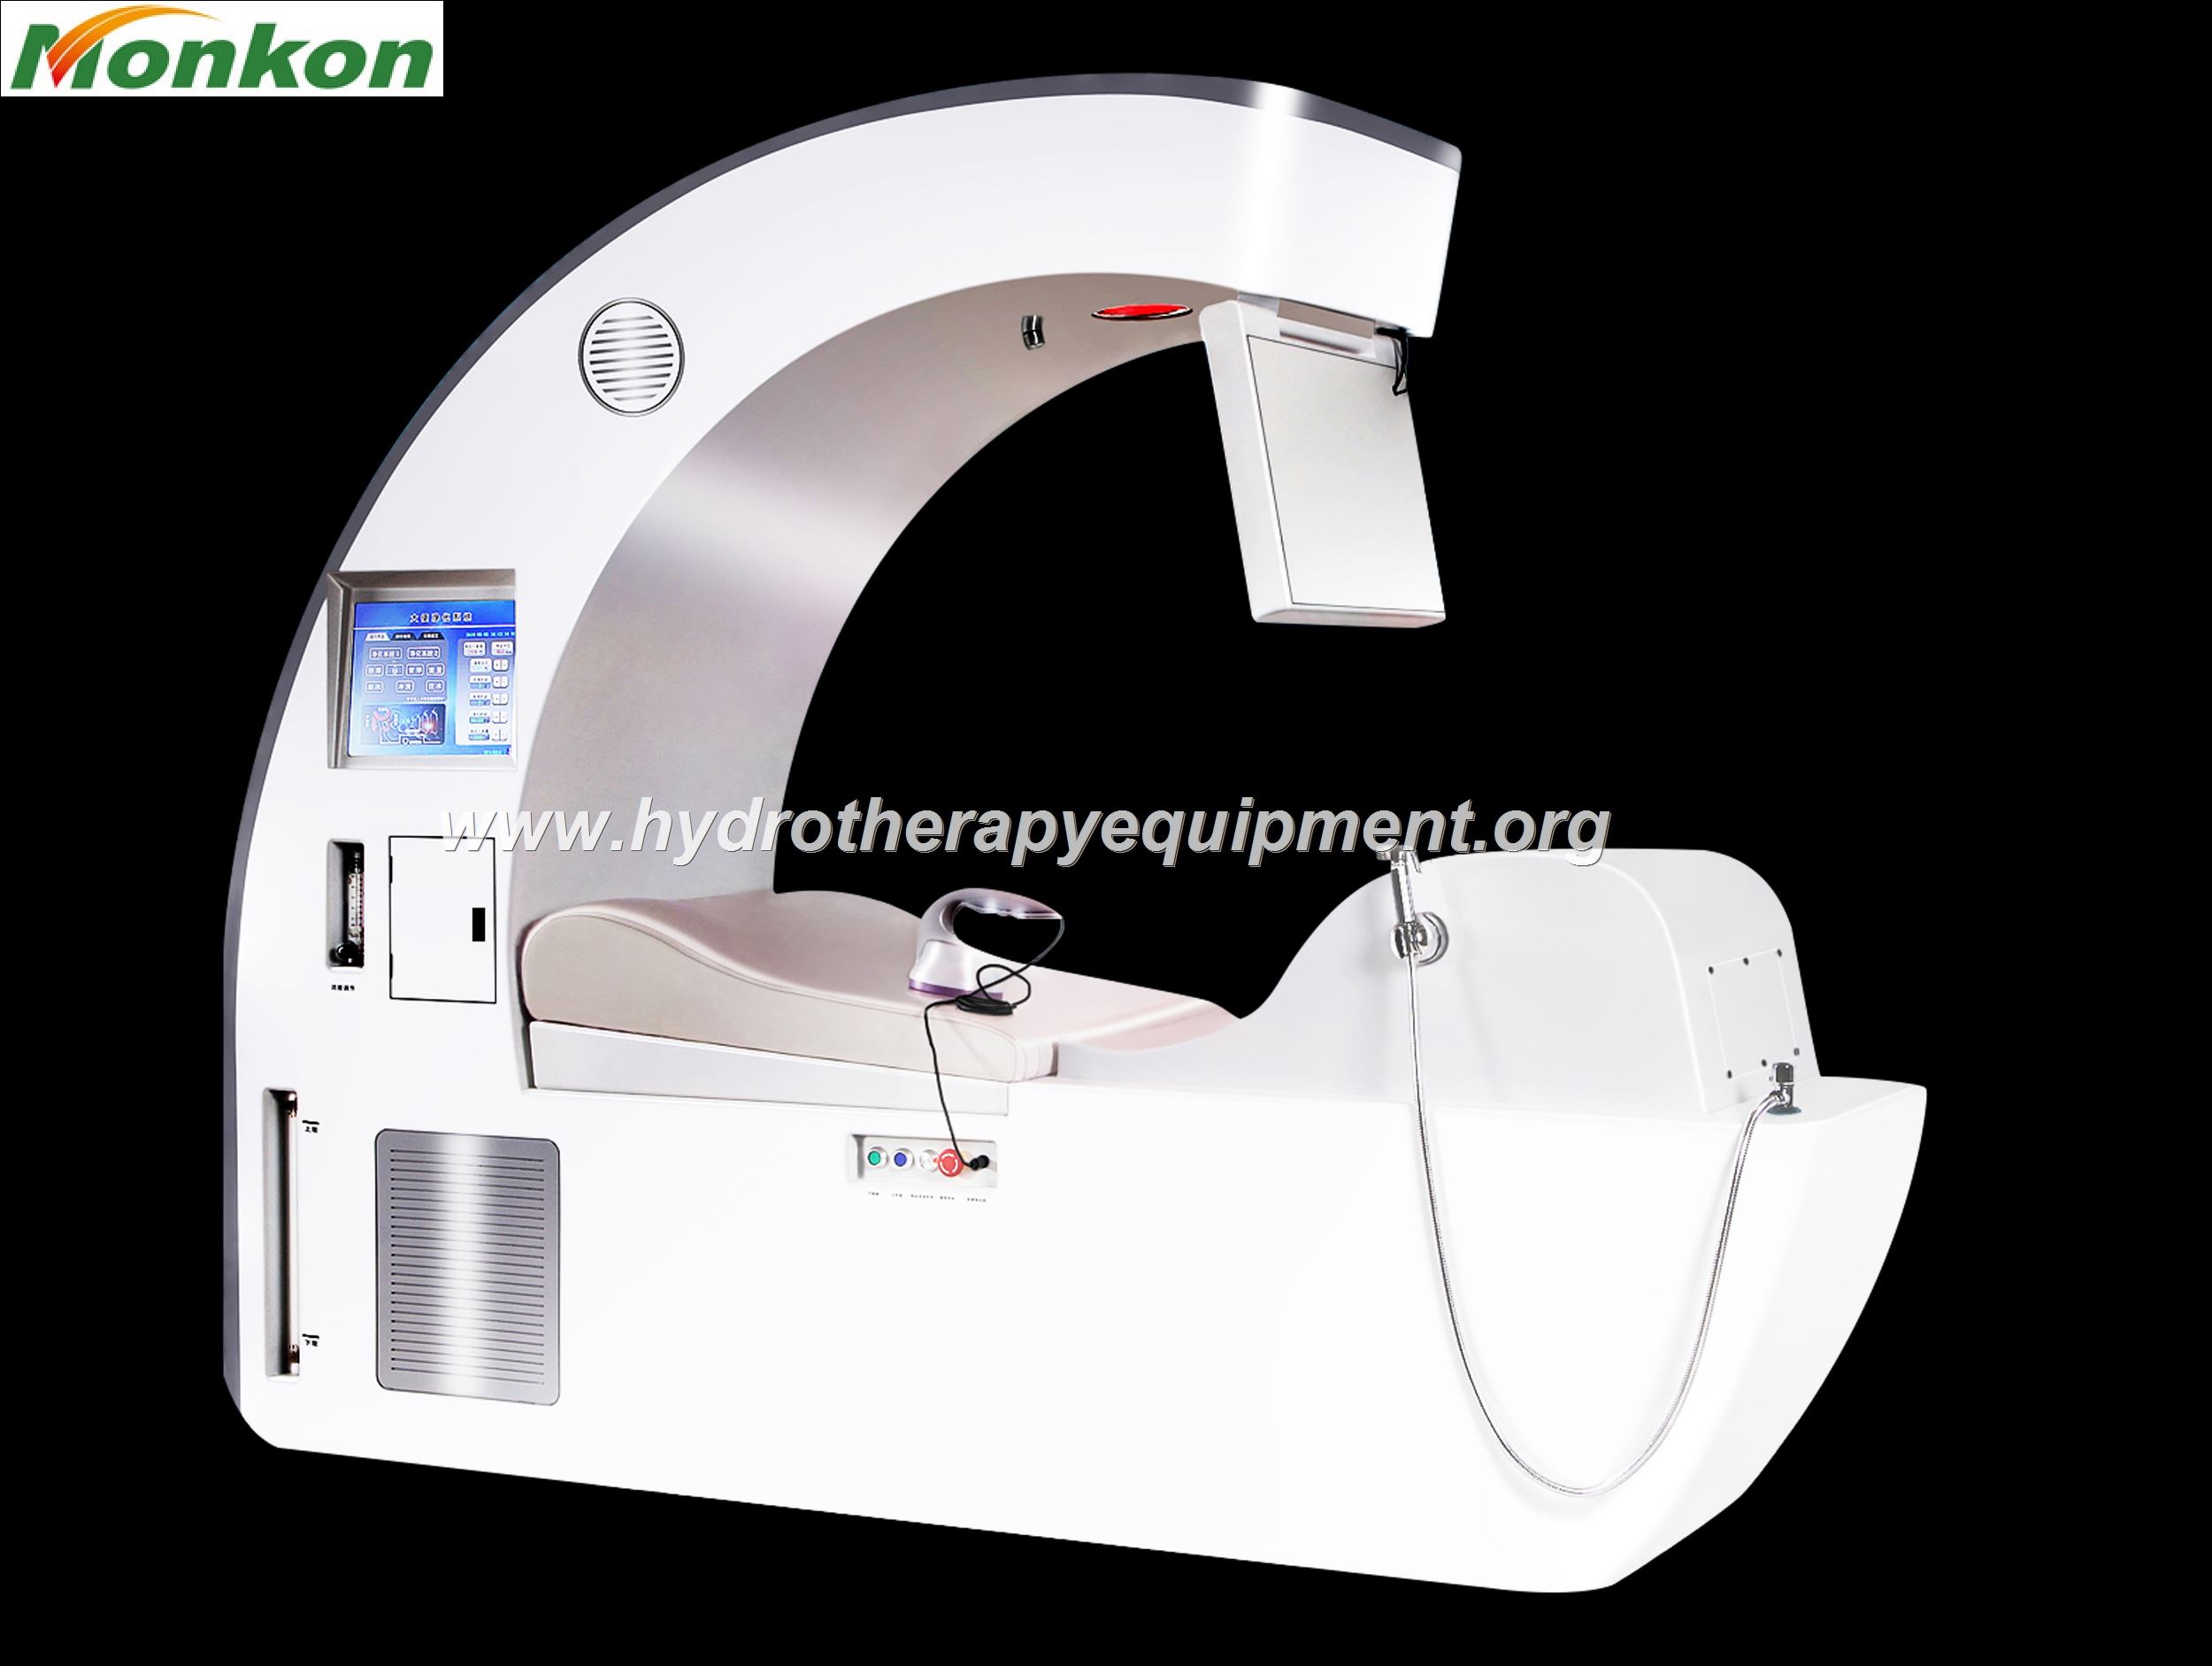 Colon Hydrotherapy Equipment For Sale